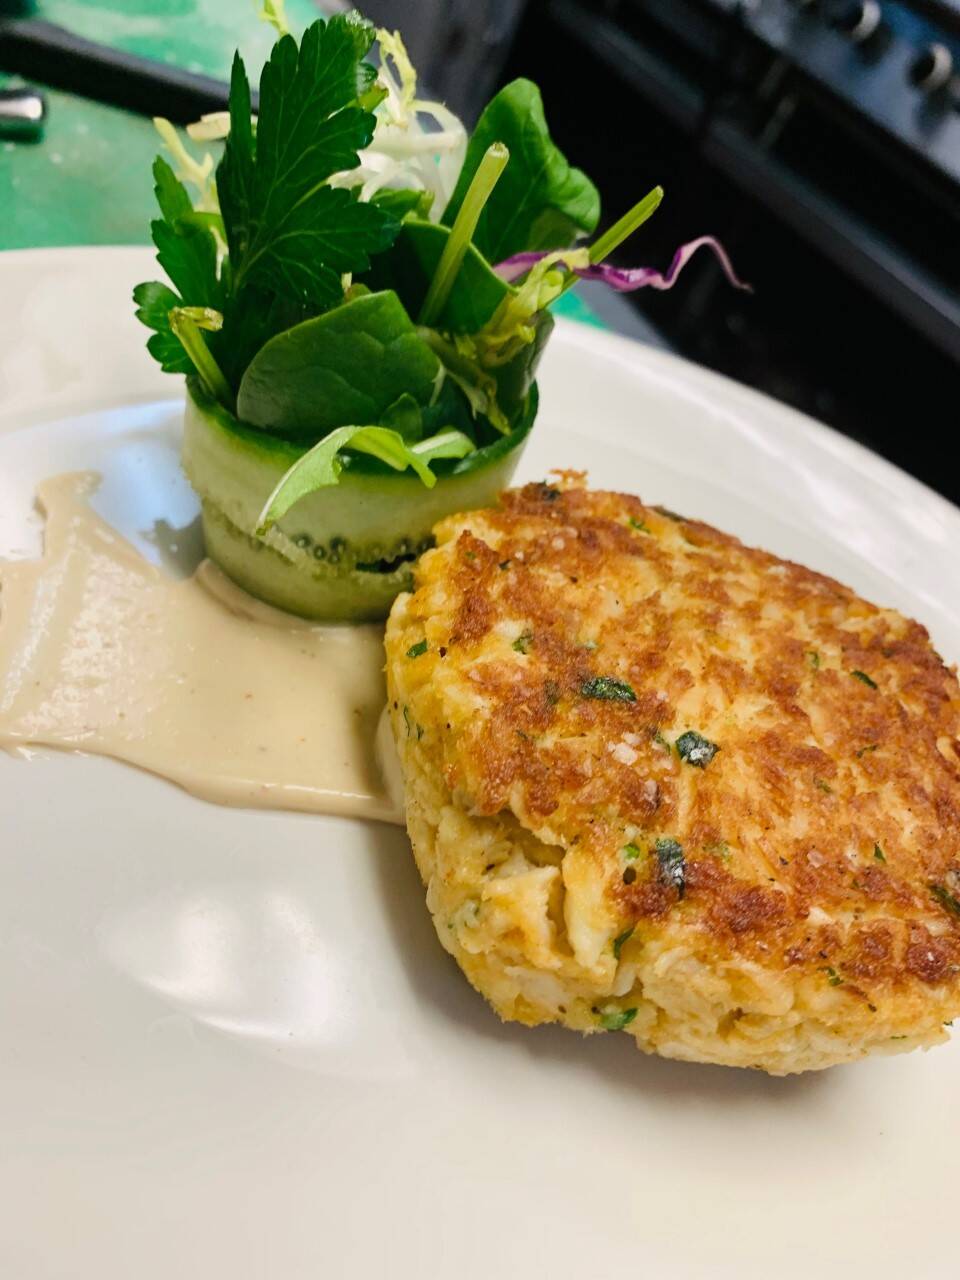 House-made Blue Crab Cake served with Remoulade Sauce